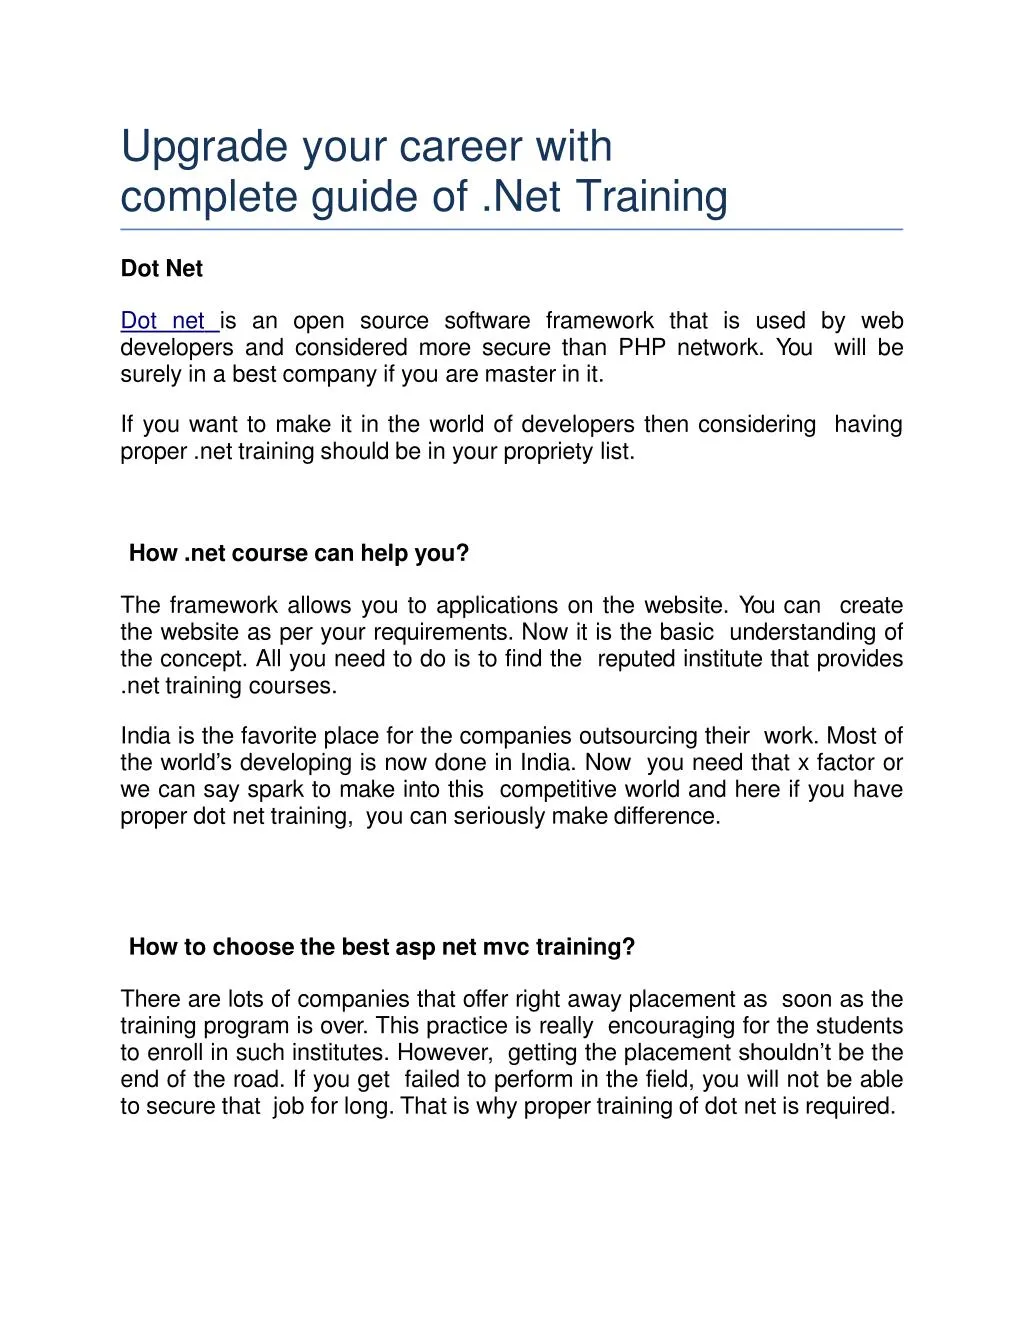 upgrade your career with complete guide of net training